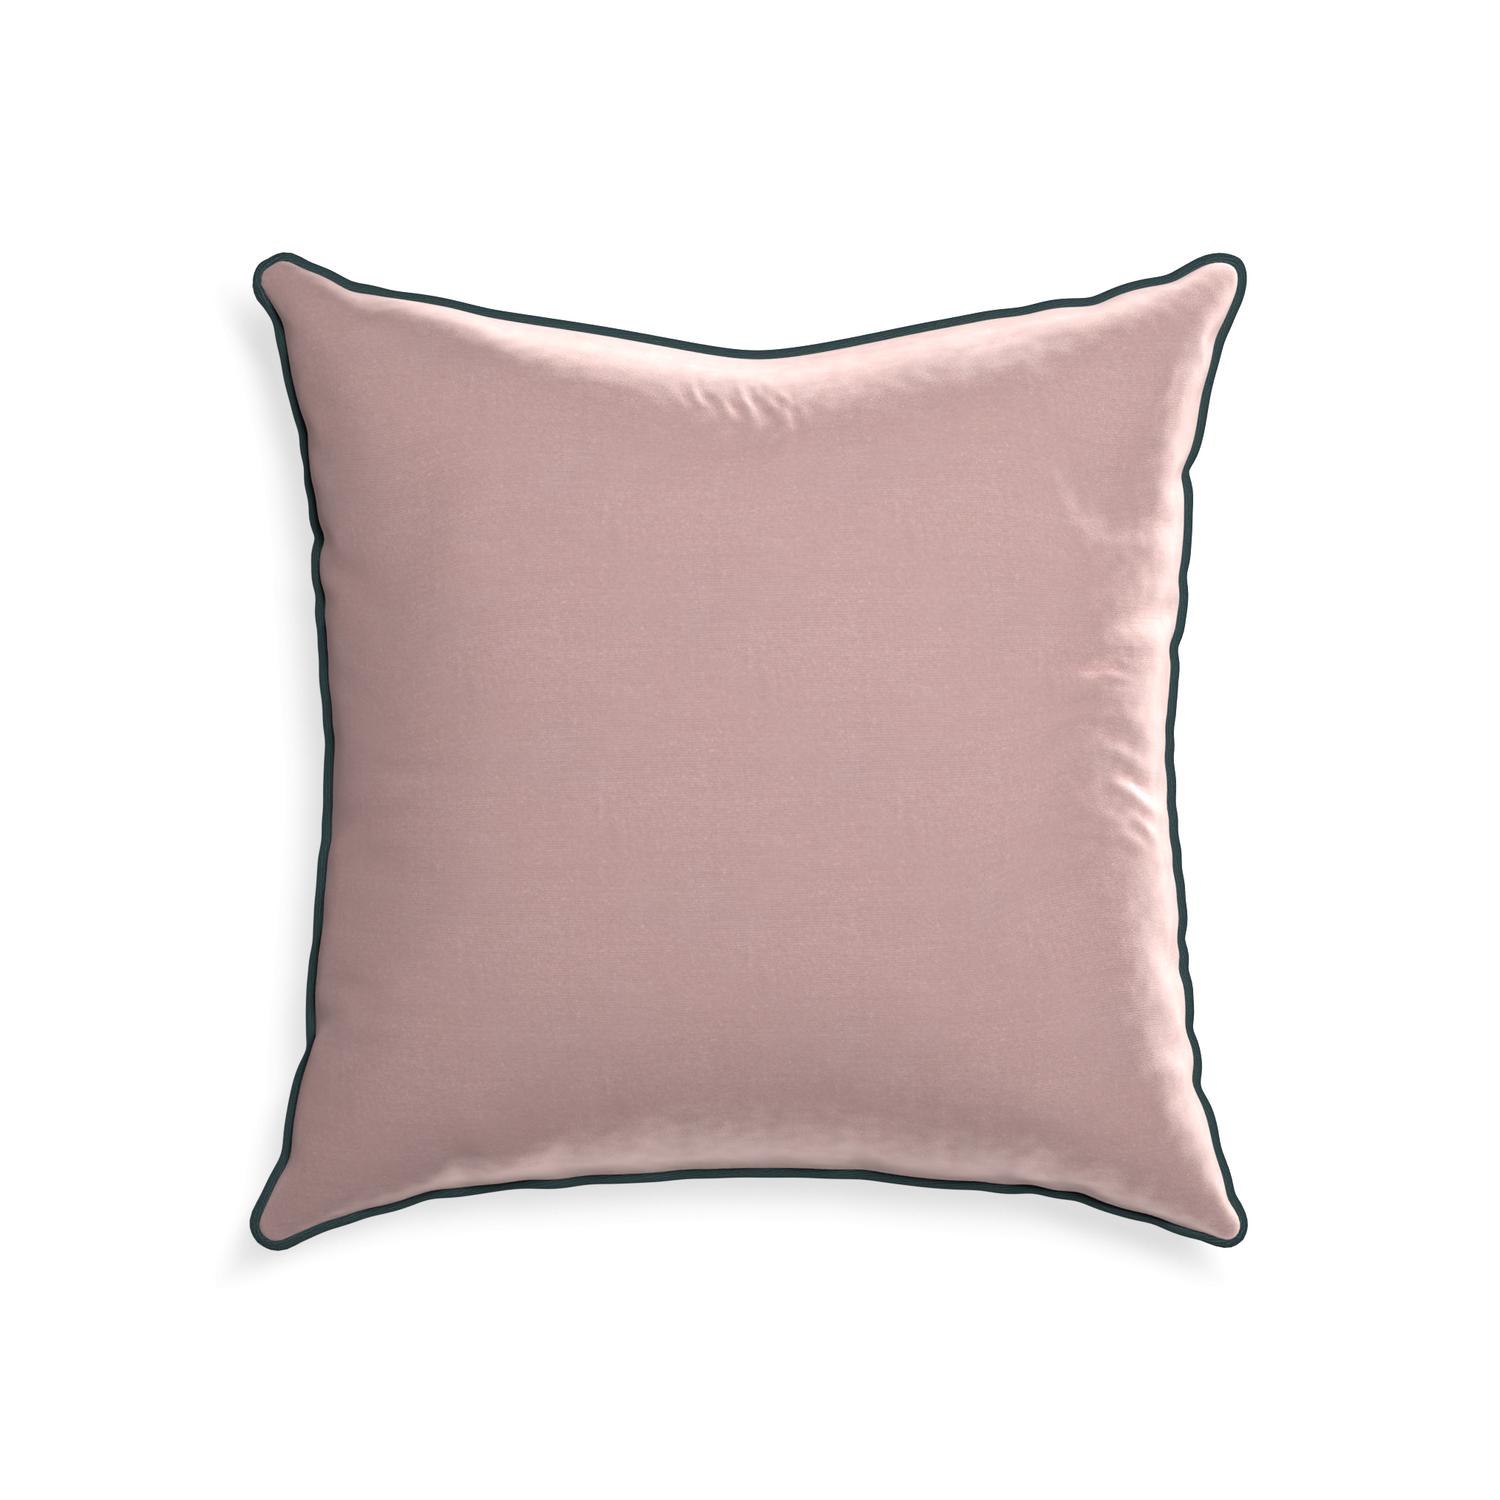 22-square mauve velvet custom mauvepillow with p piping on white background